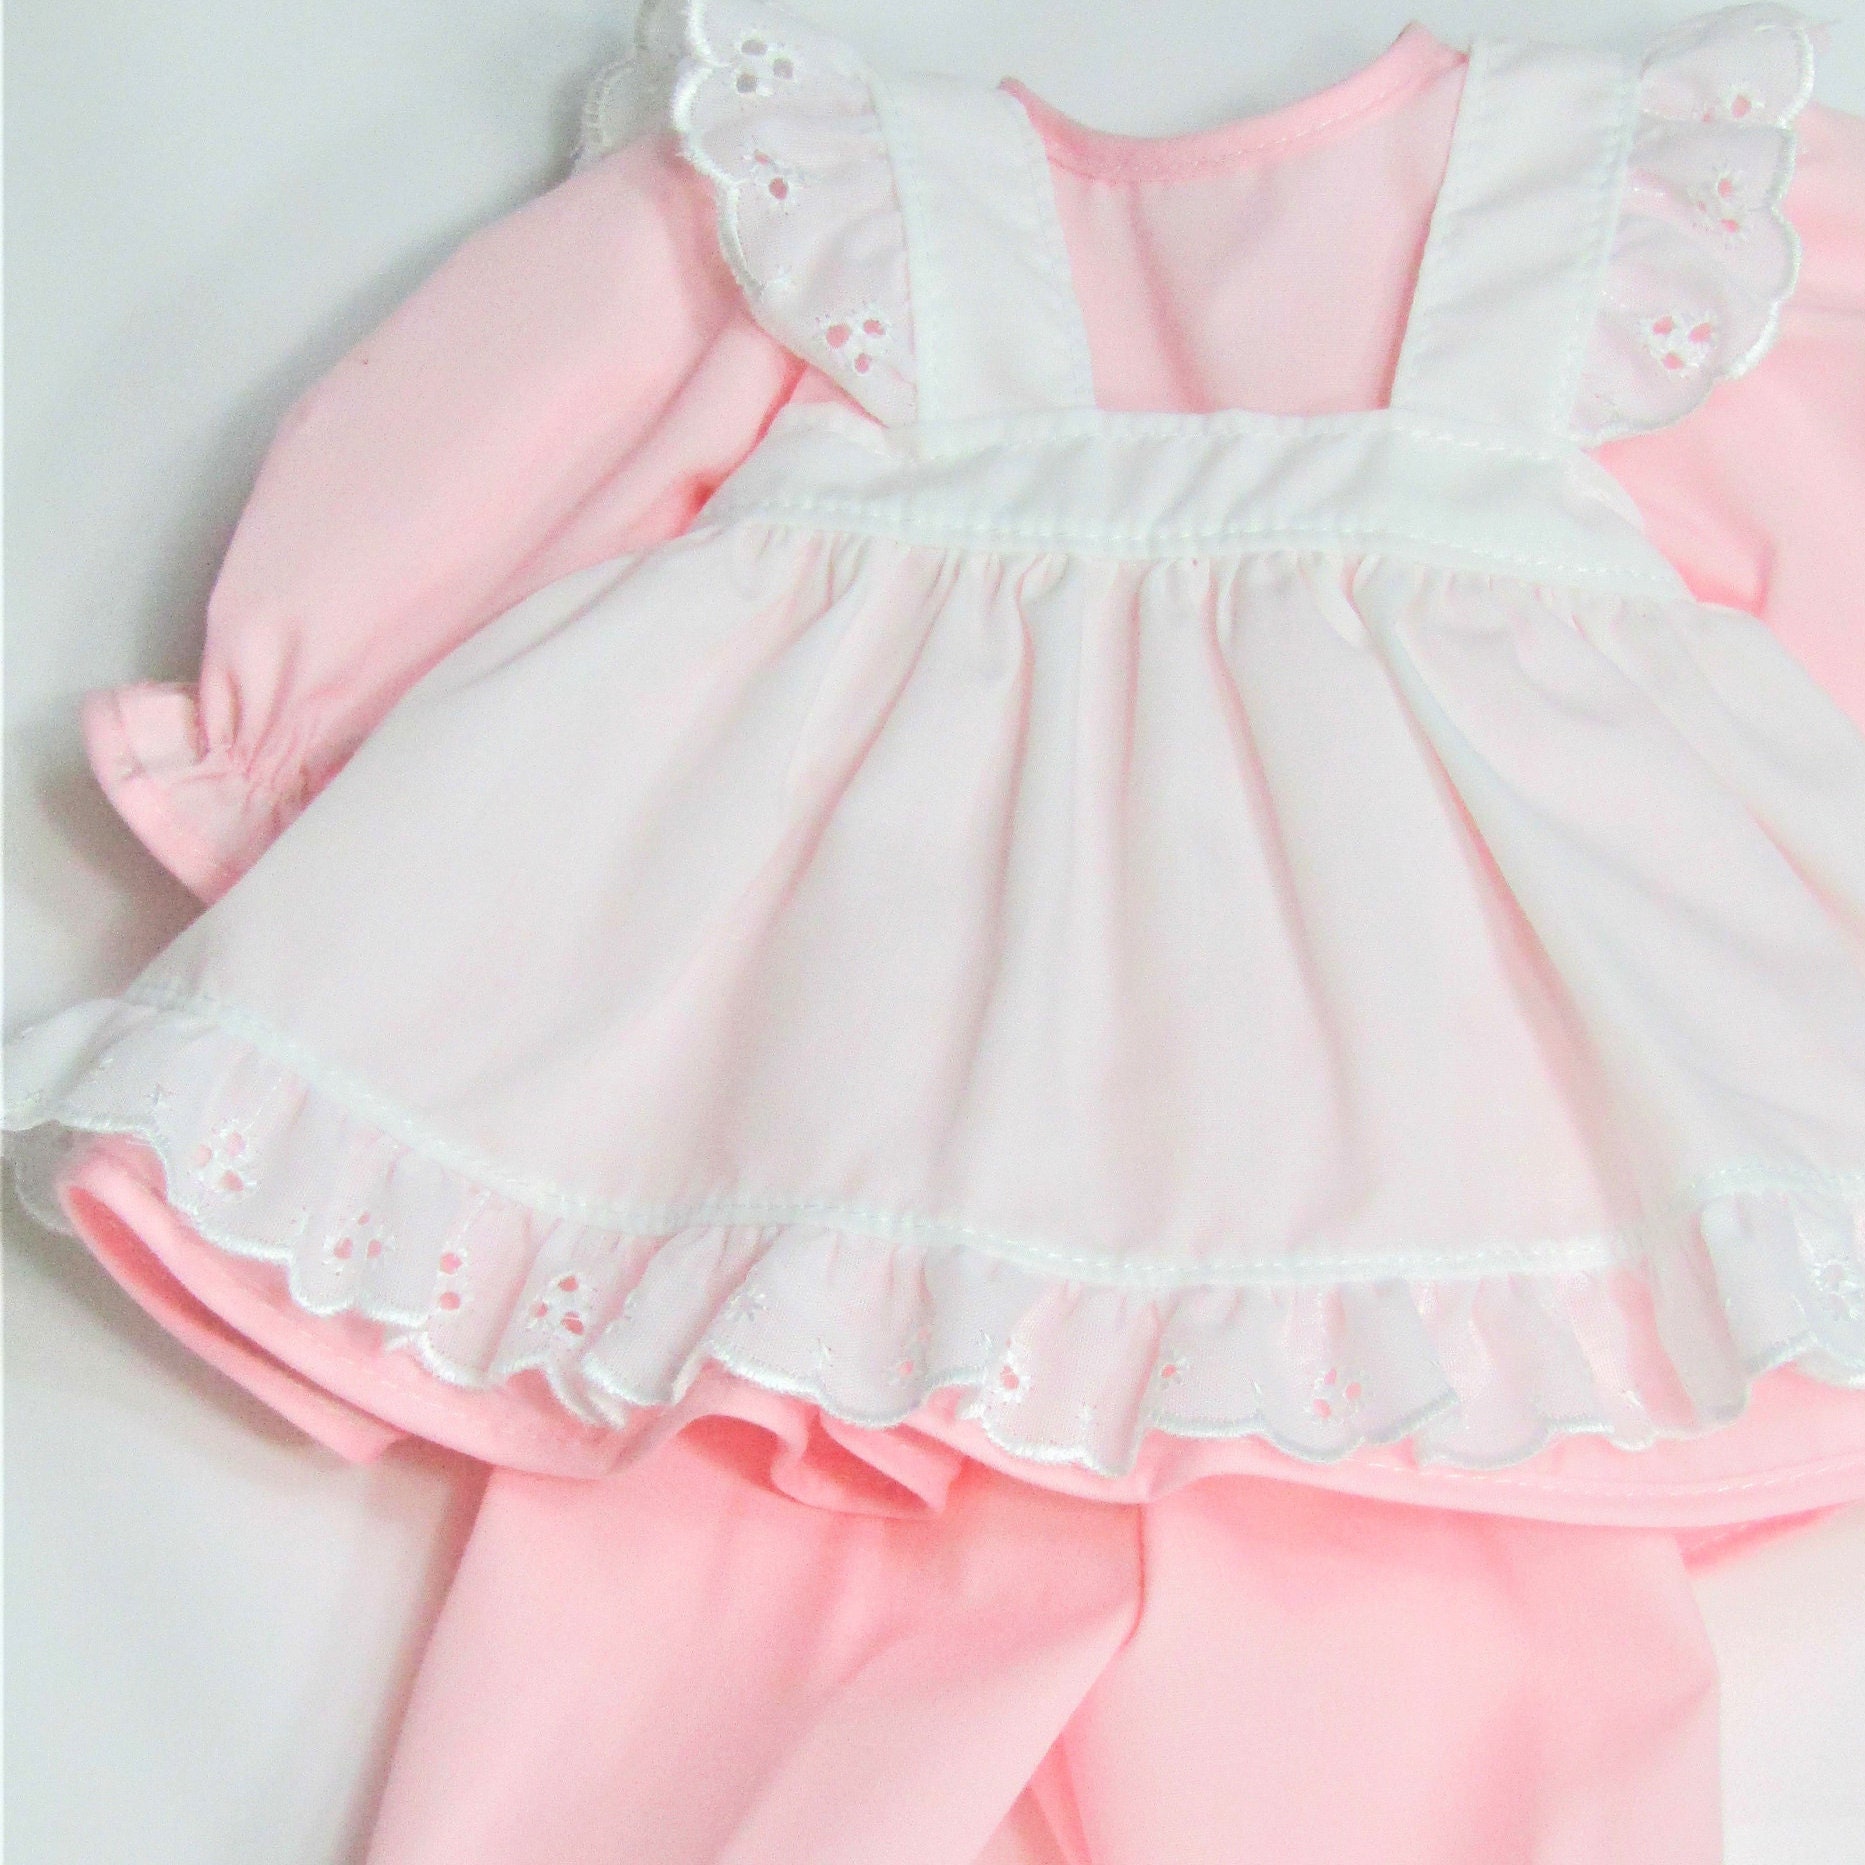 Pink Baby Doll Dress 15 Inch Doll Clothes Doll Pinafore - Etsy